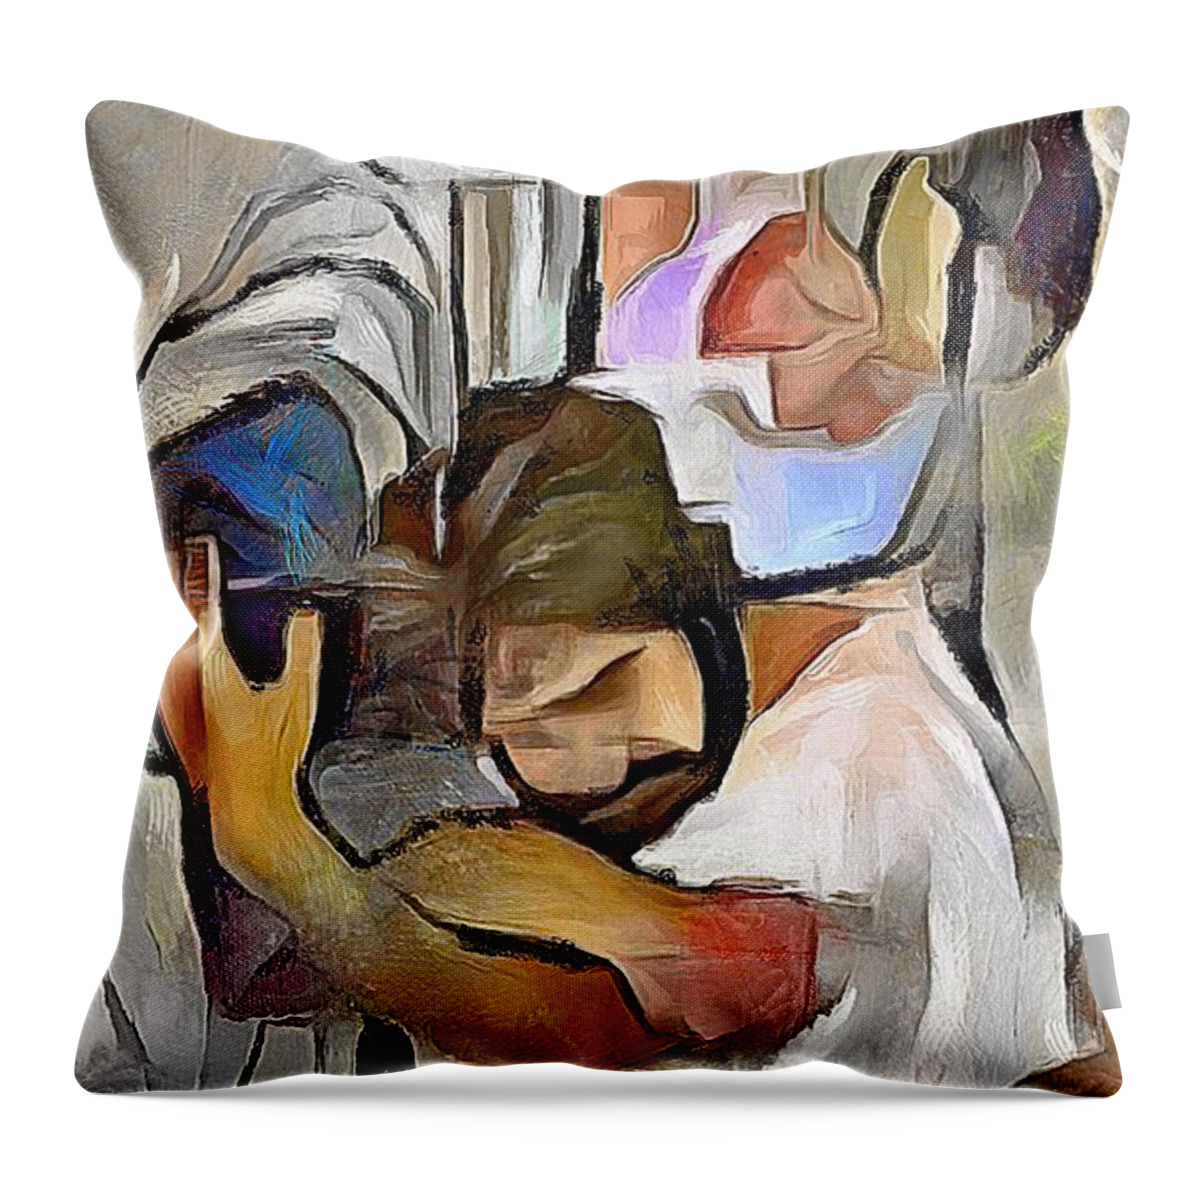 Christian Art Throw Pillow featuring the painting Prodigal Son by Wayne Pascall